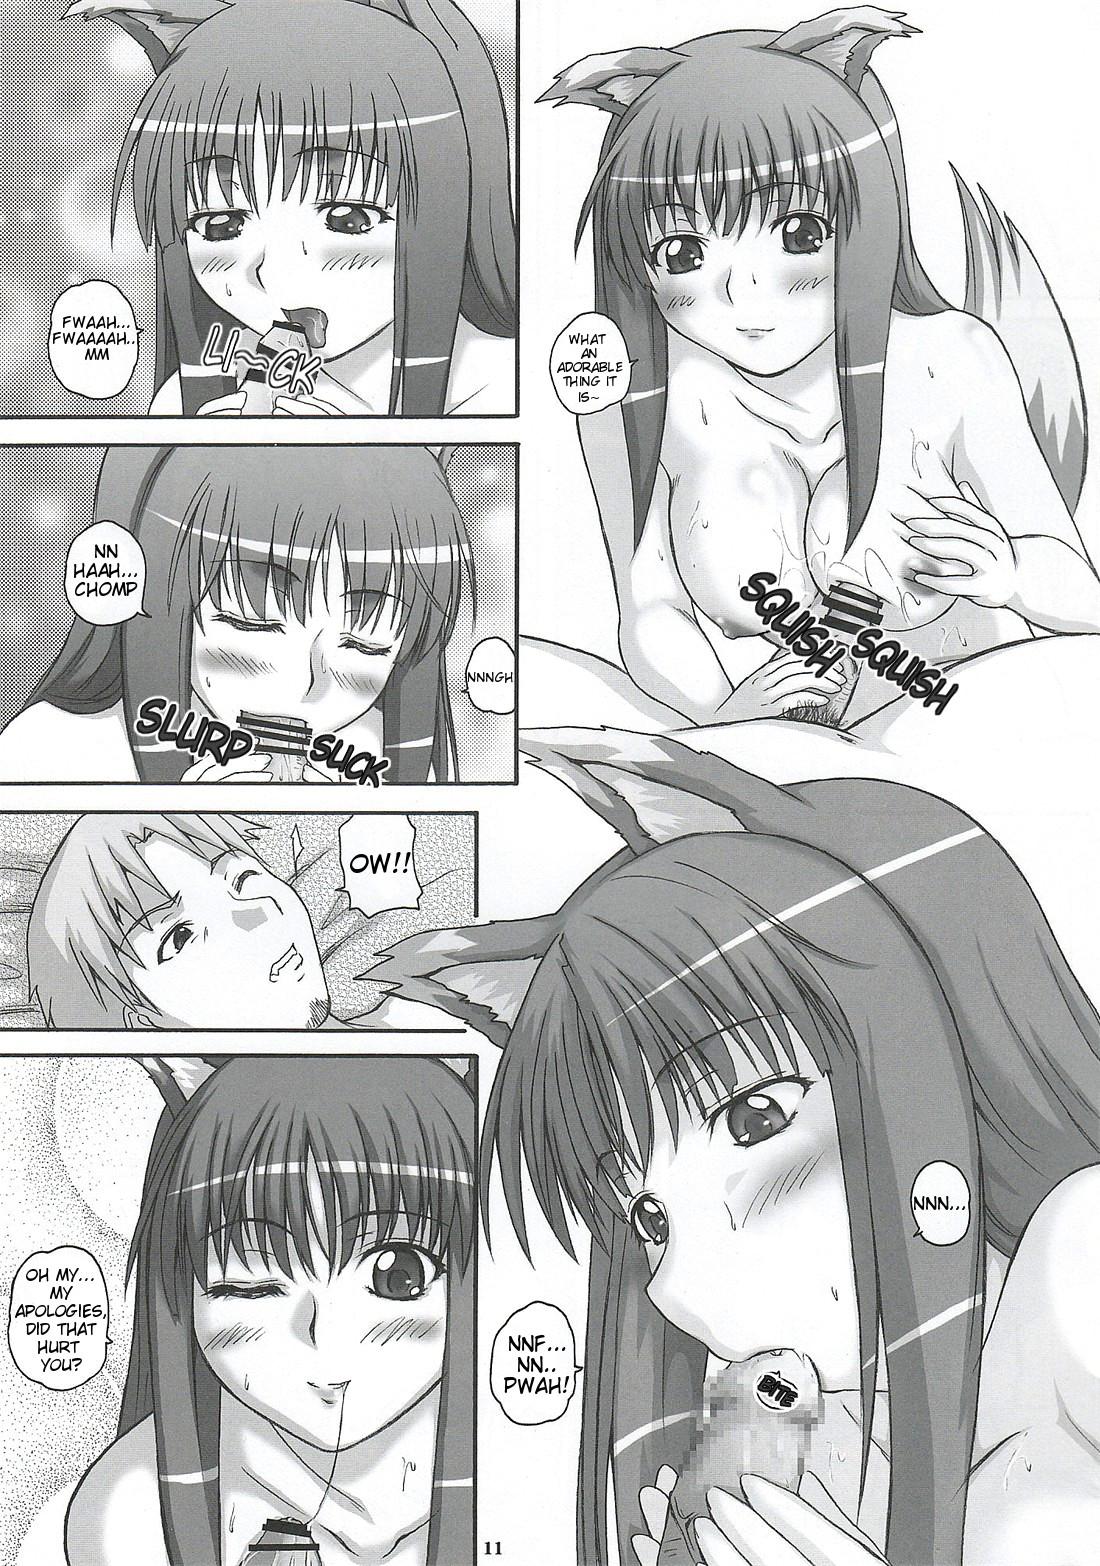 Spying 2Stroke TY - Spice and wolf Thylinh - Page 10